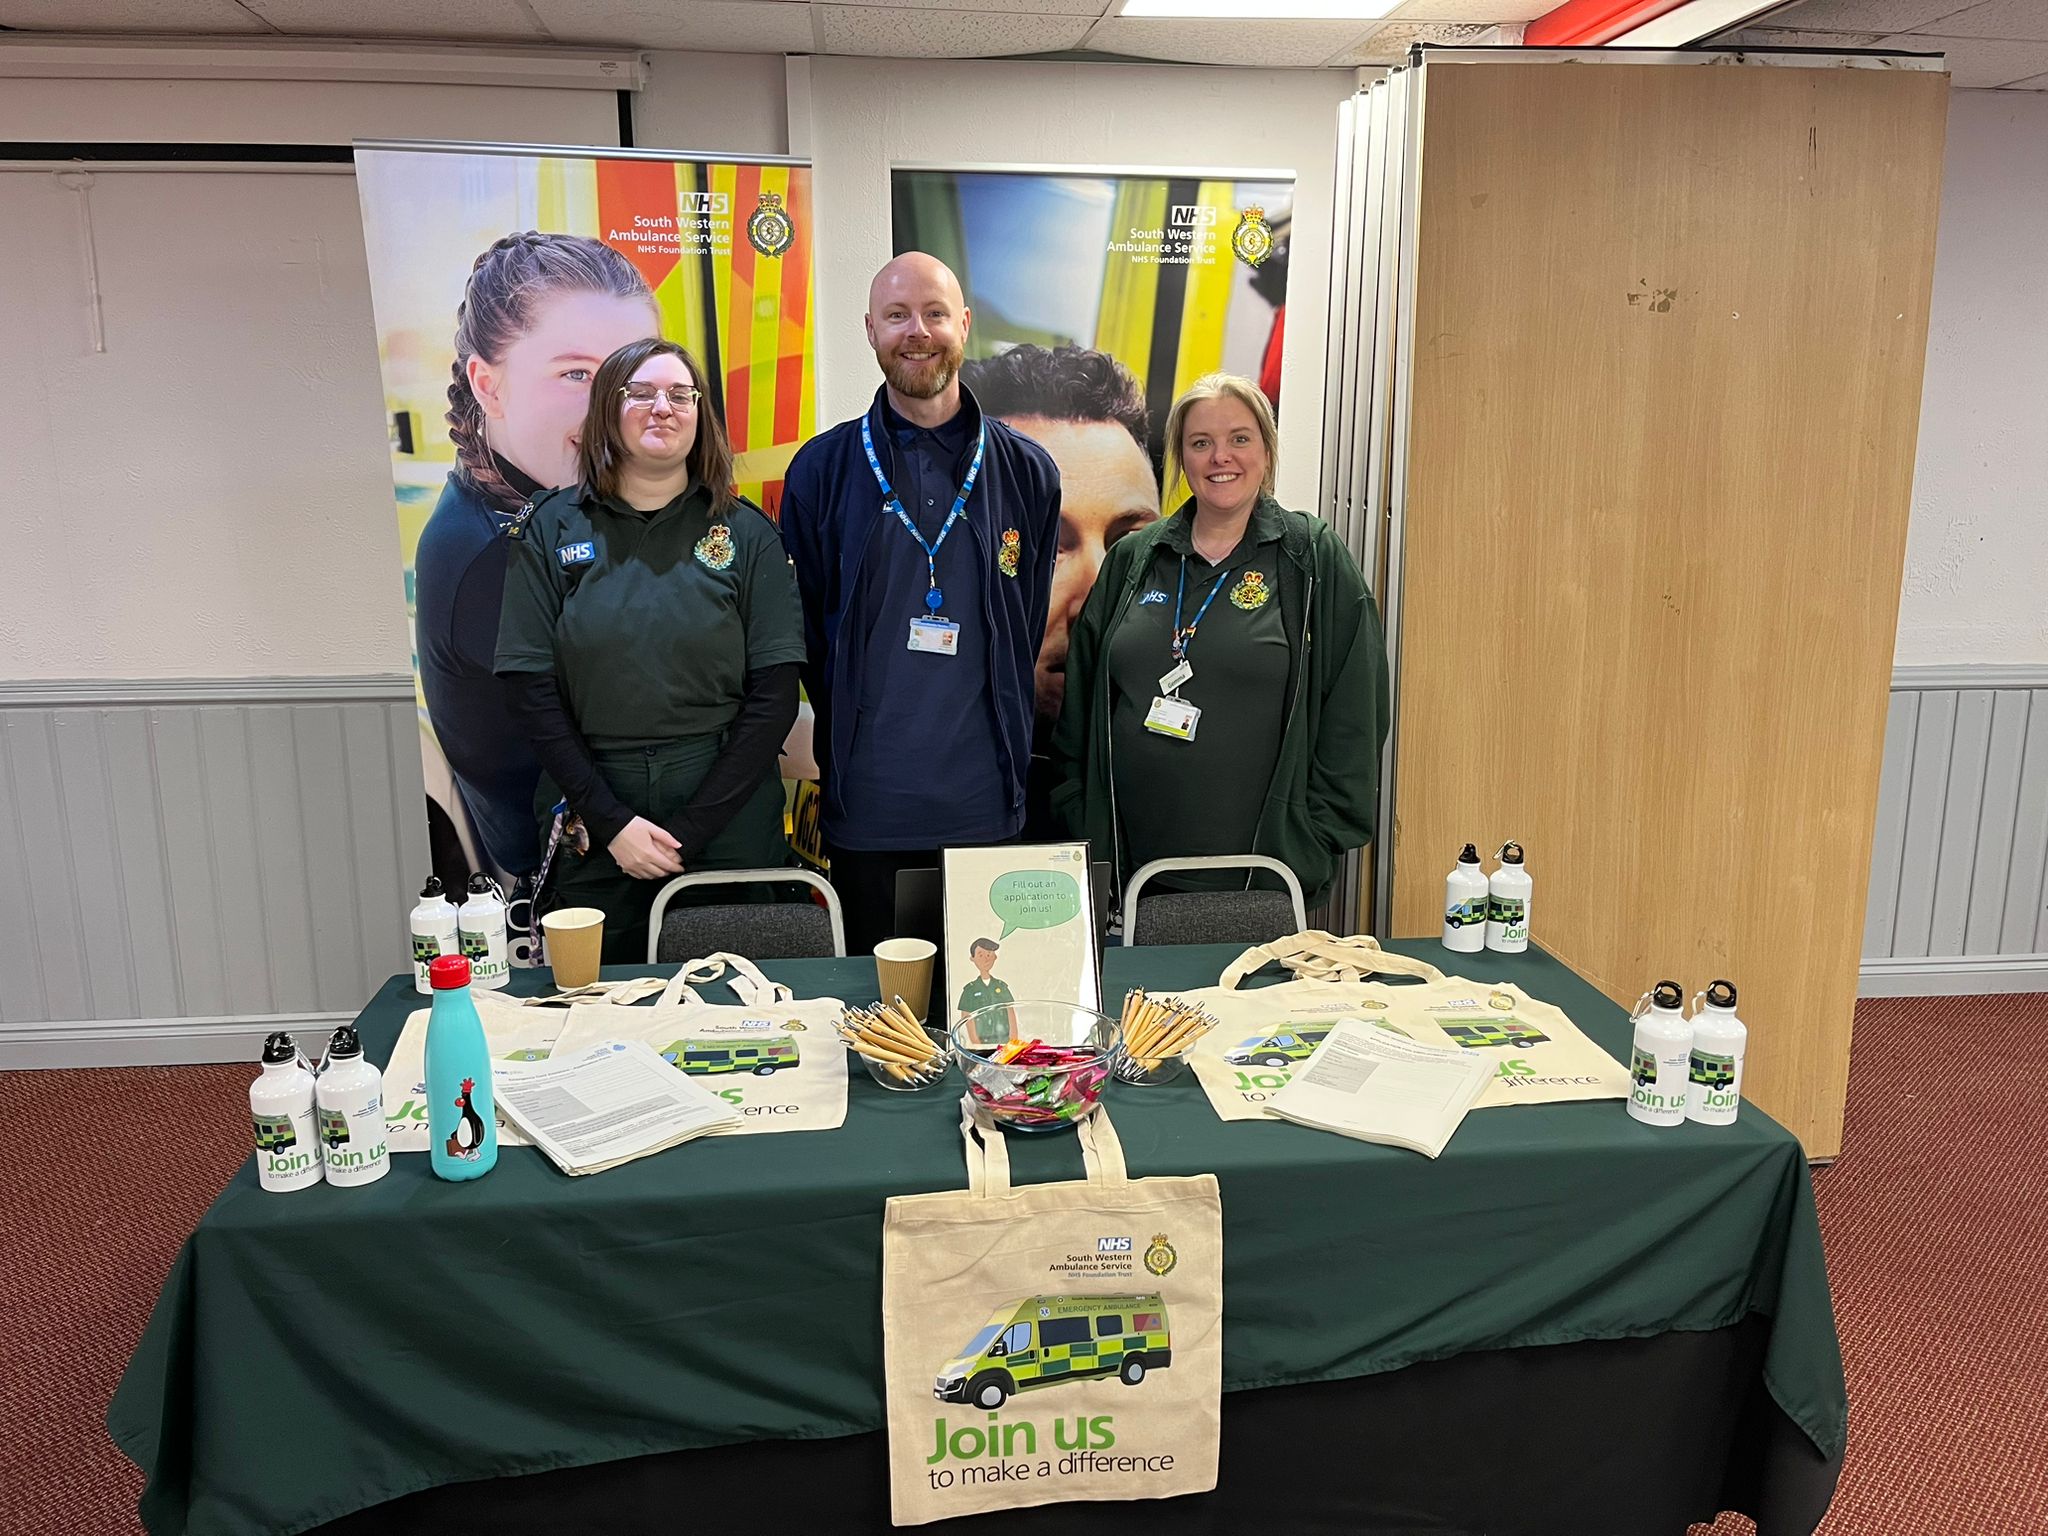 South West Ambulance Service at our event in Swindon